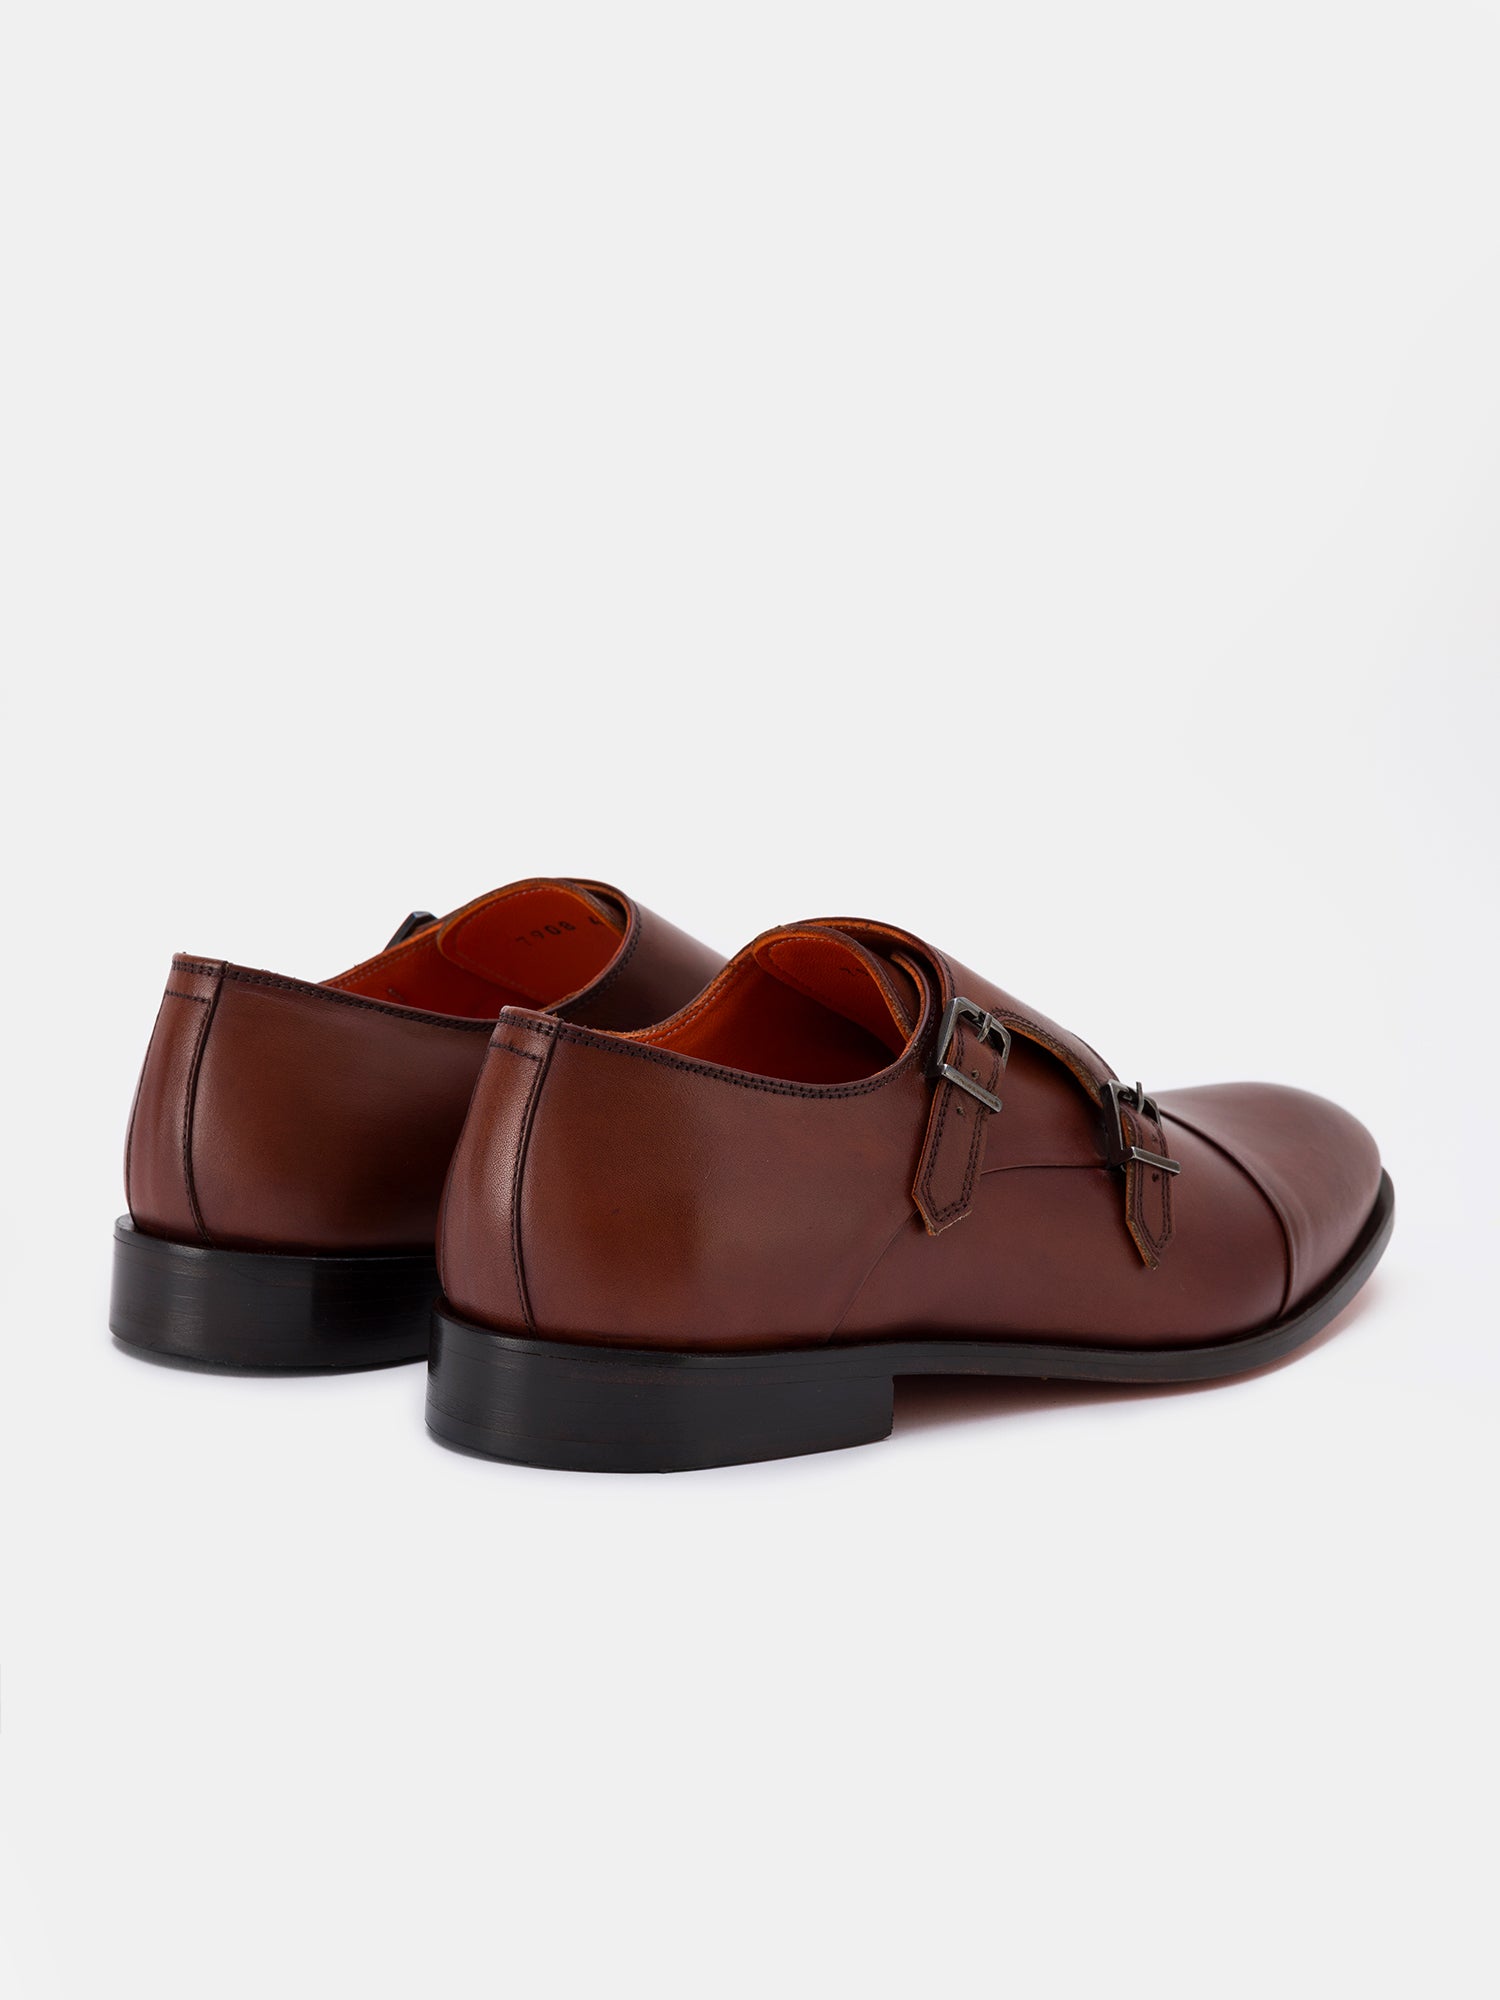 Brown Leather Monk Straps Shoes